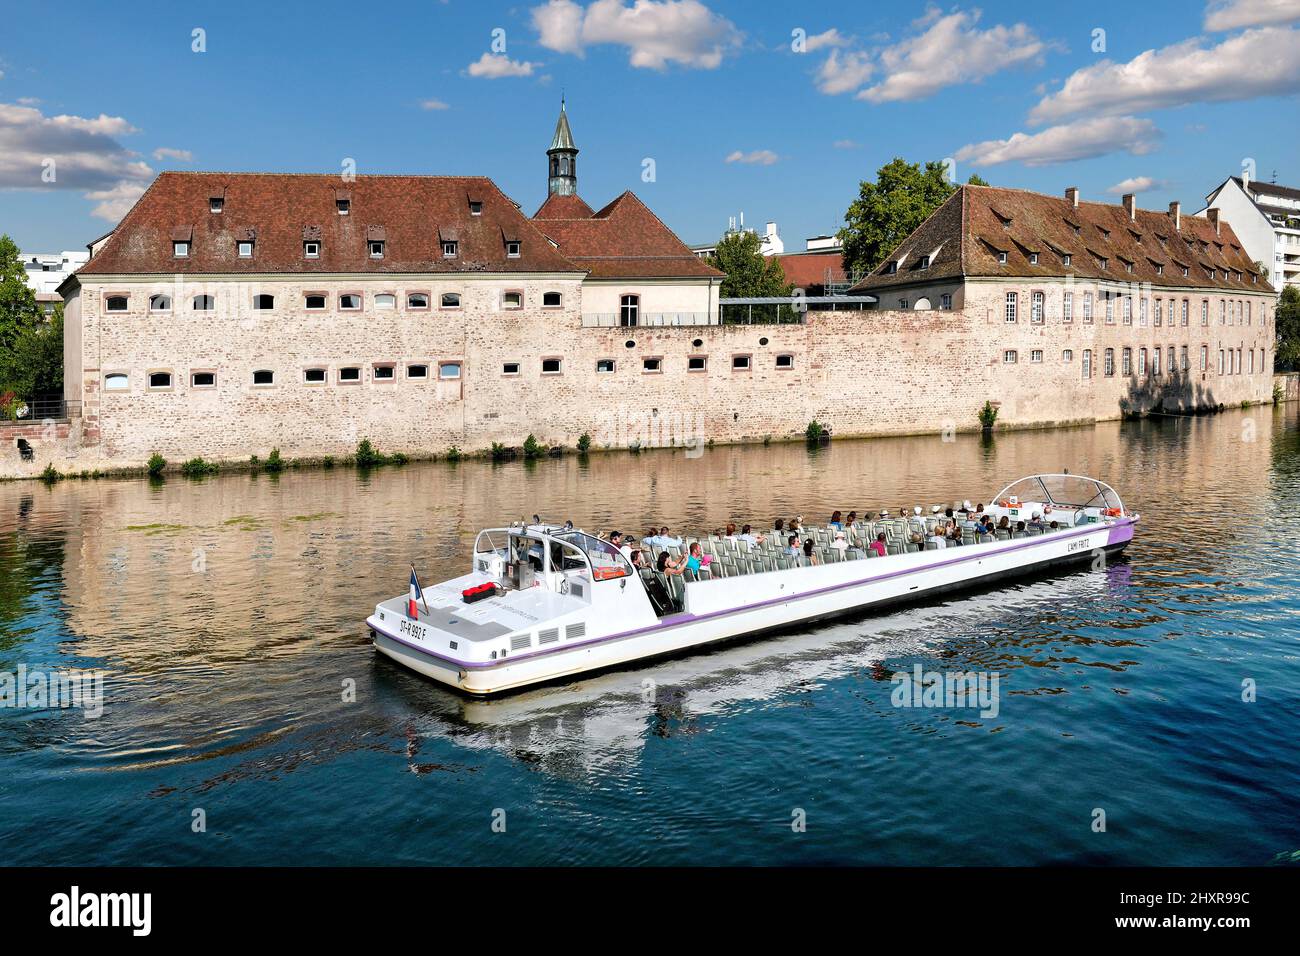 France, Strasbourg, the historic center listed as World Heritage by UNESCO, La Petite France, the Ill river and ENA school. Stock Photo